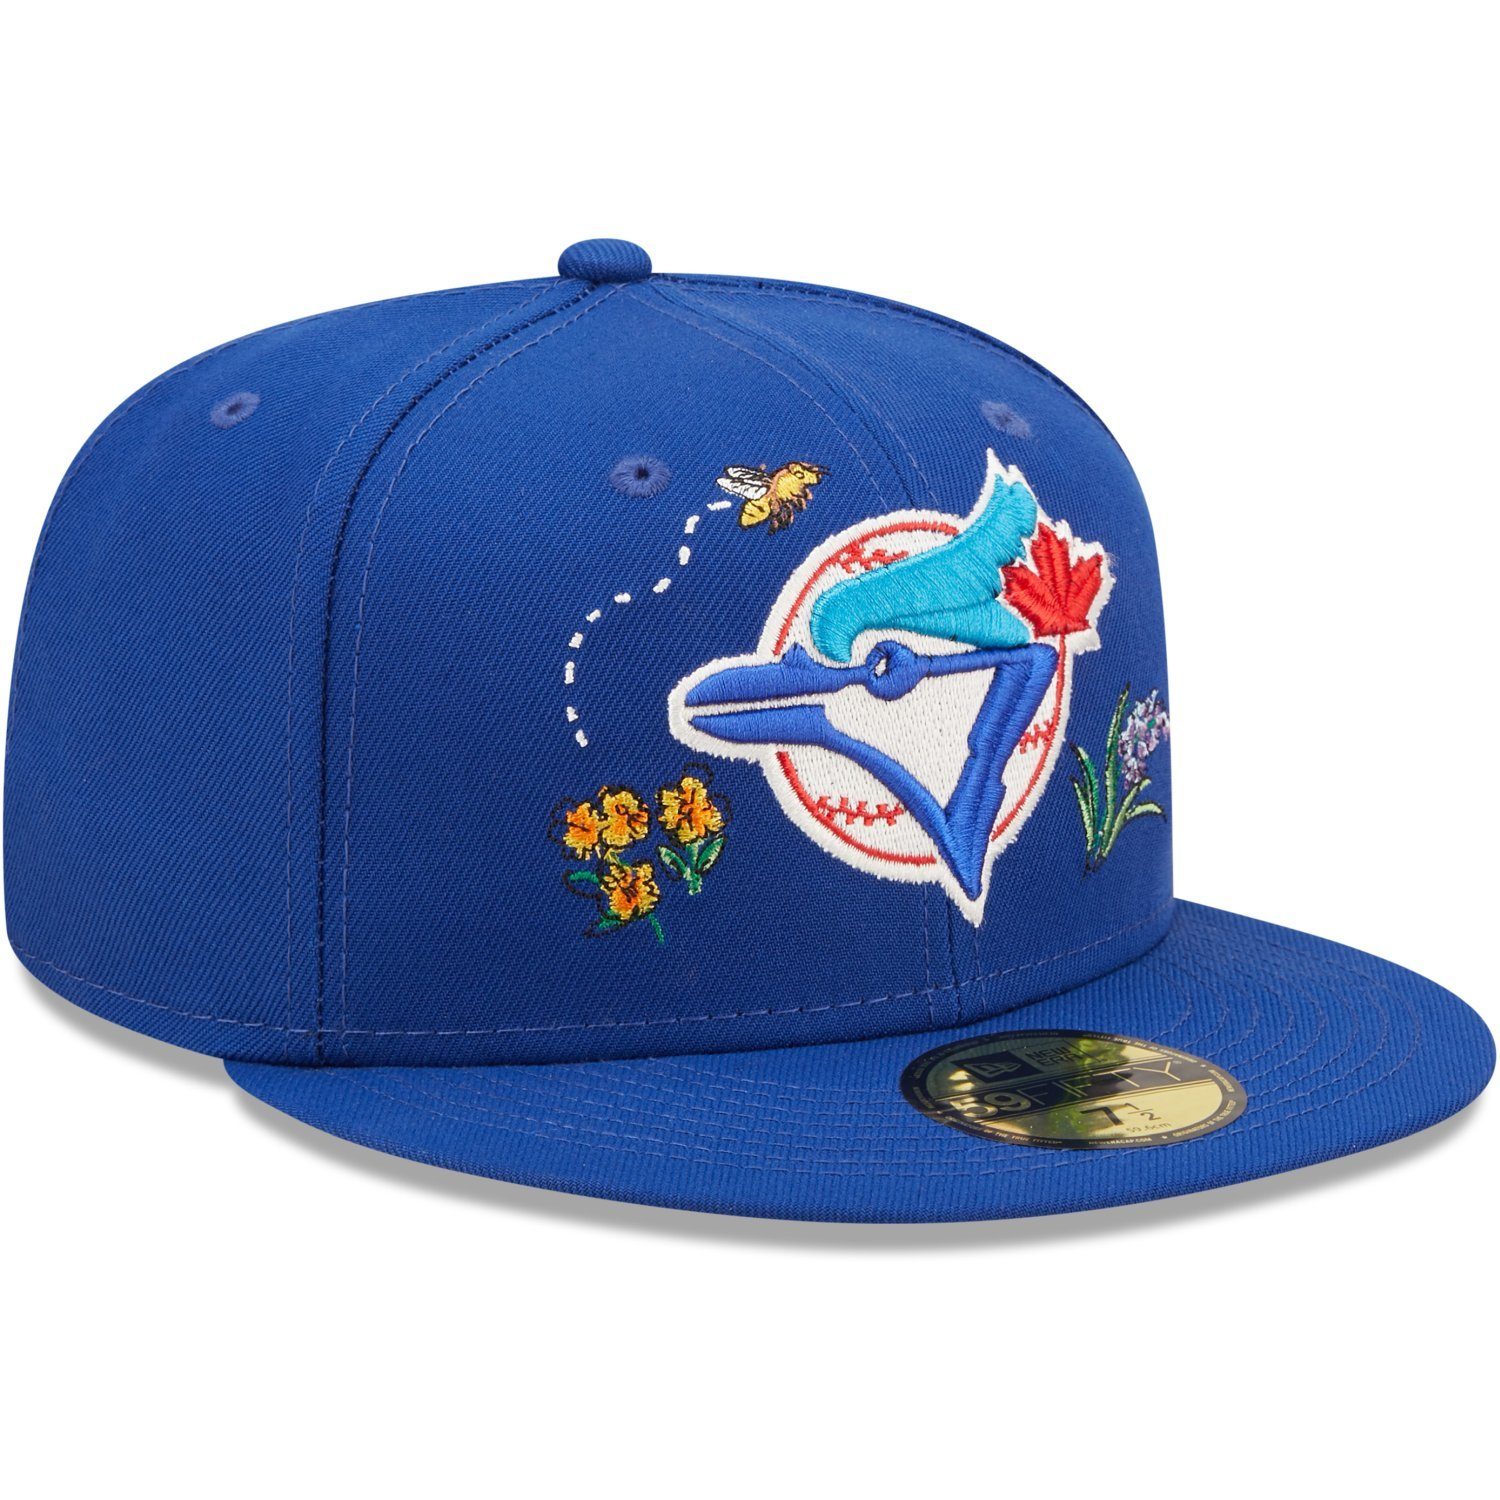 New Era Fitted Cap 59Fifty FLORAL blau Toronto WATER Jays